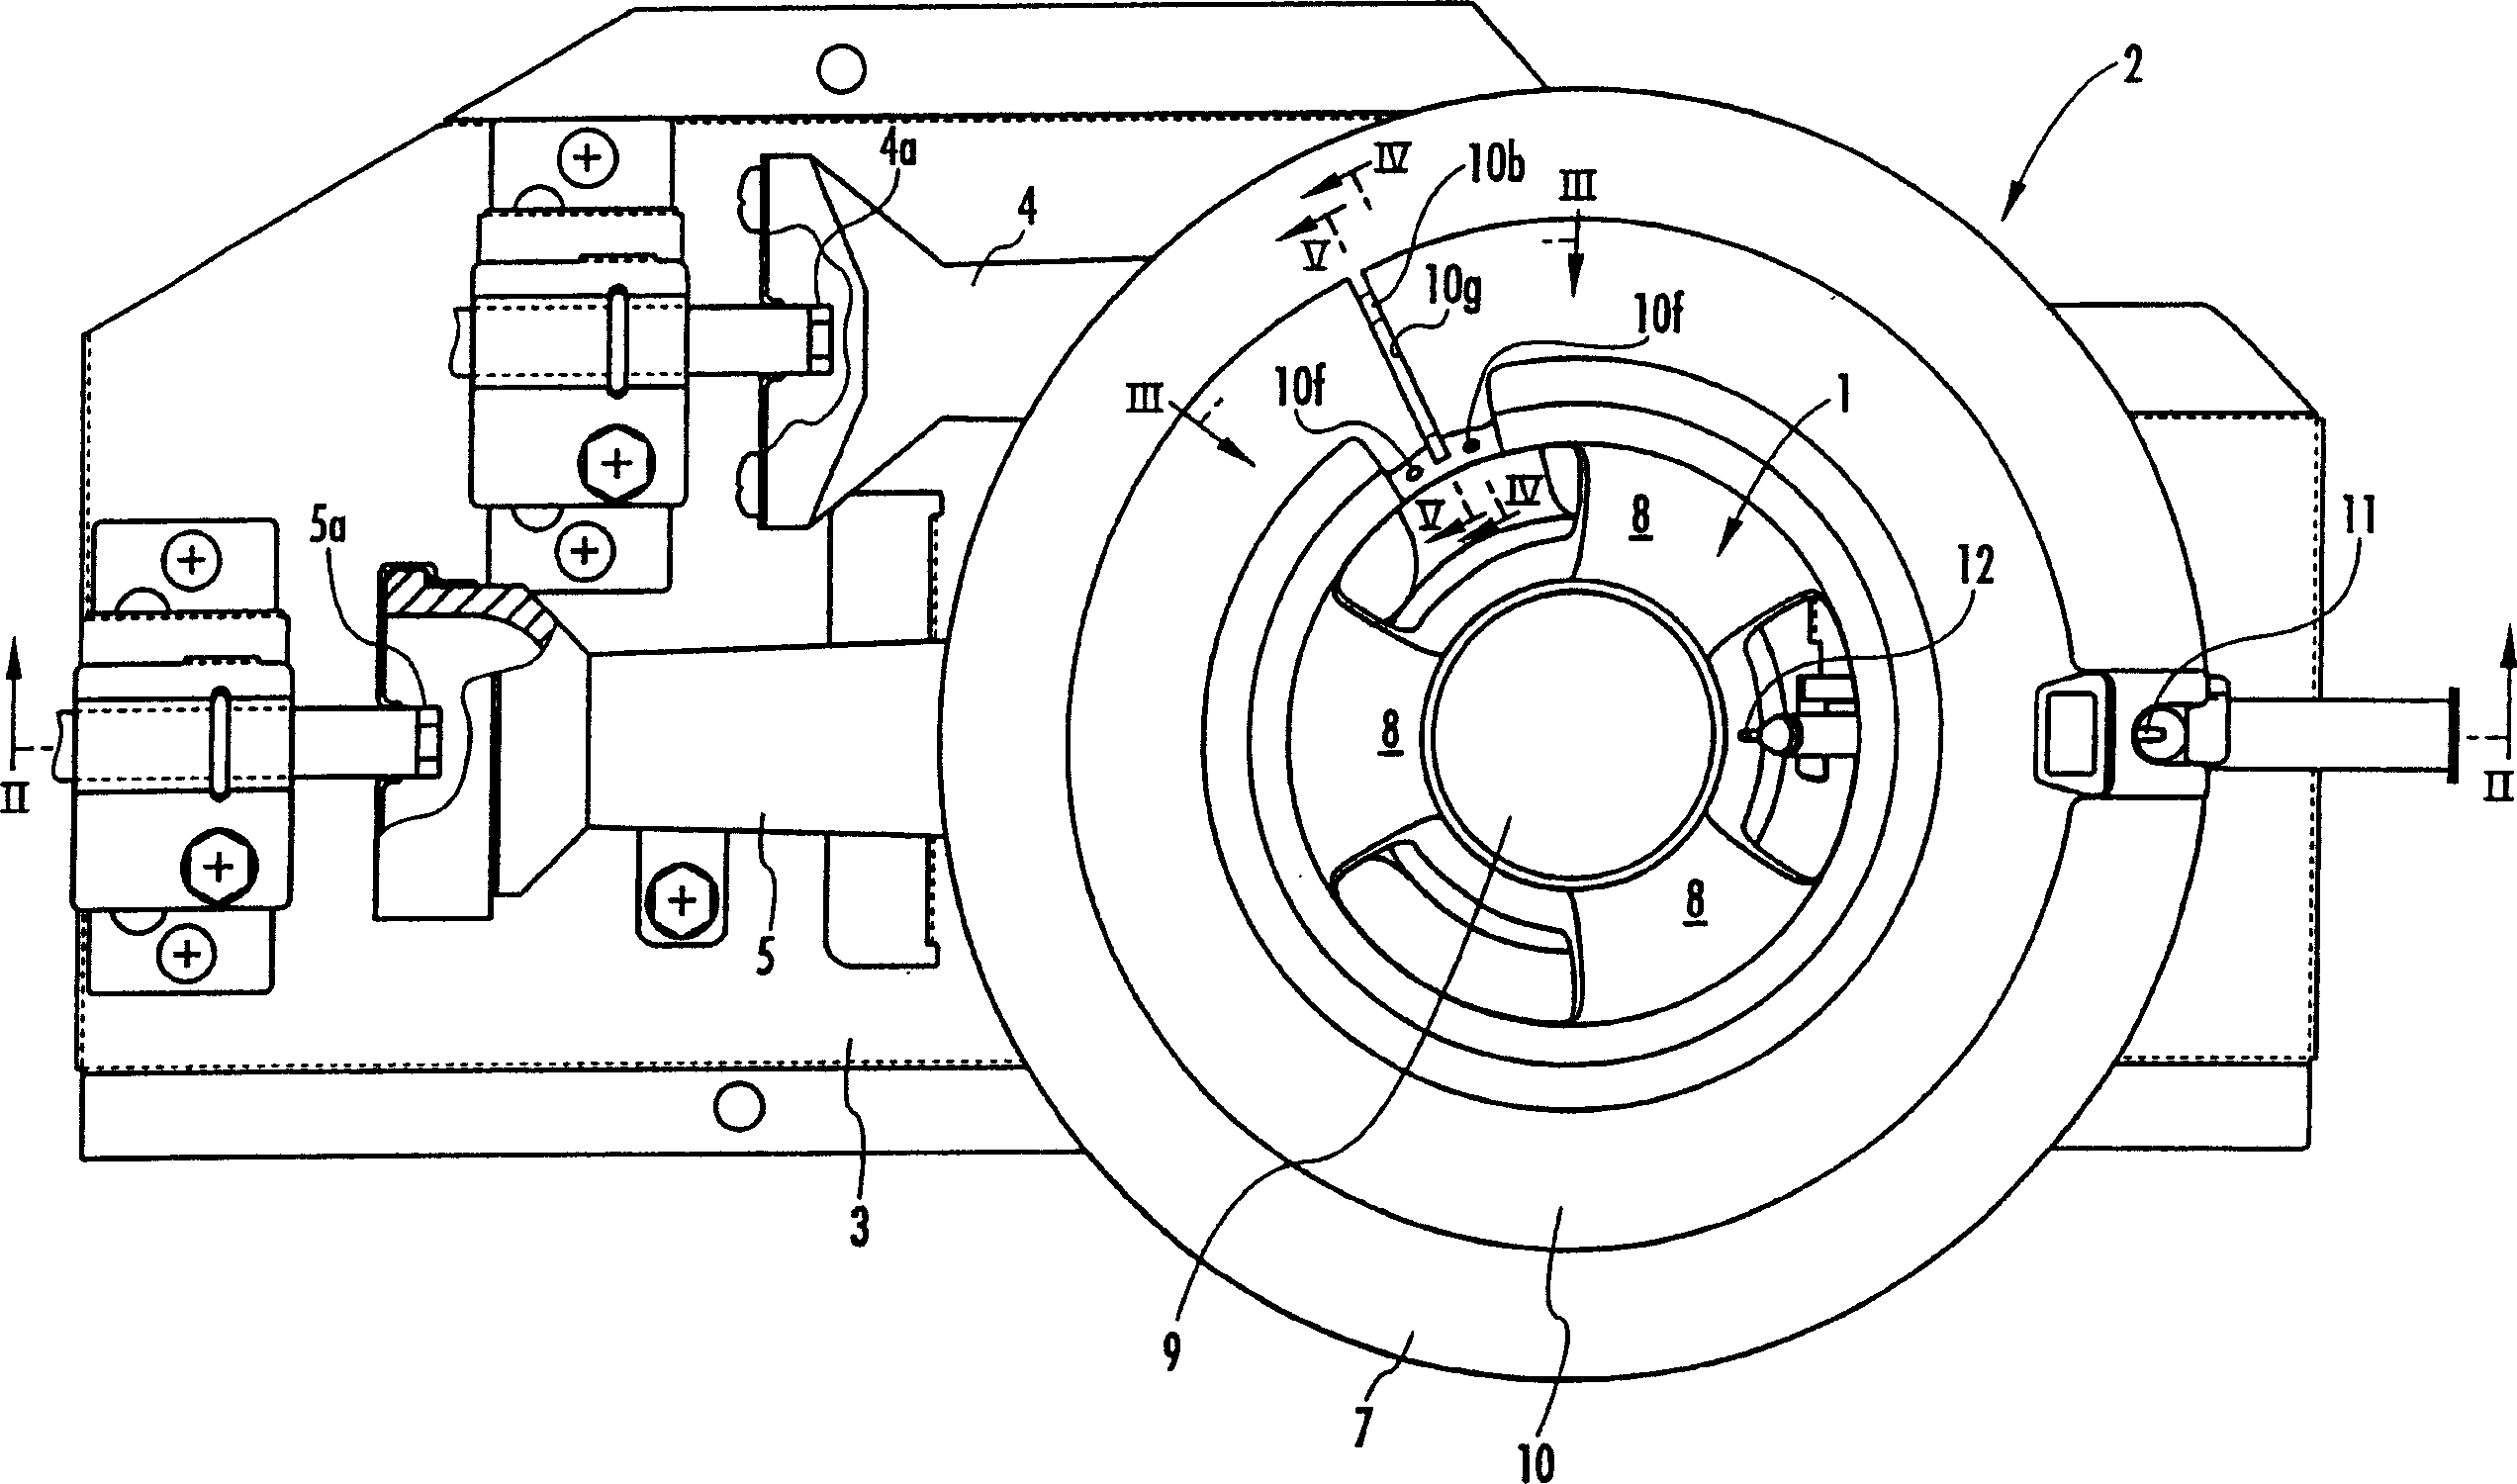 Master and auxiliary combustion device